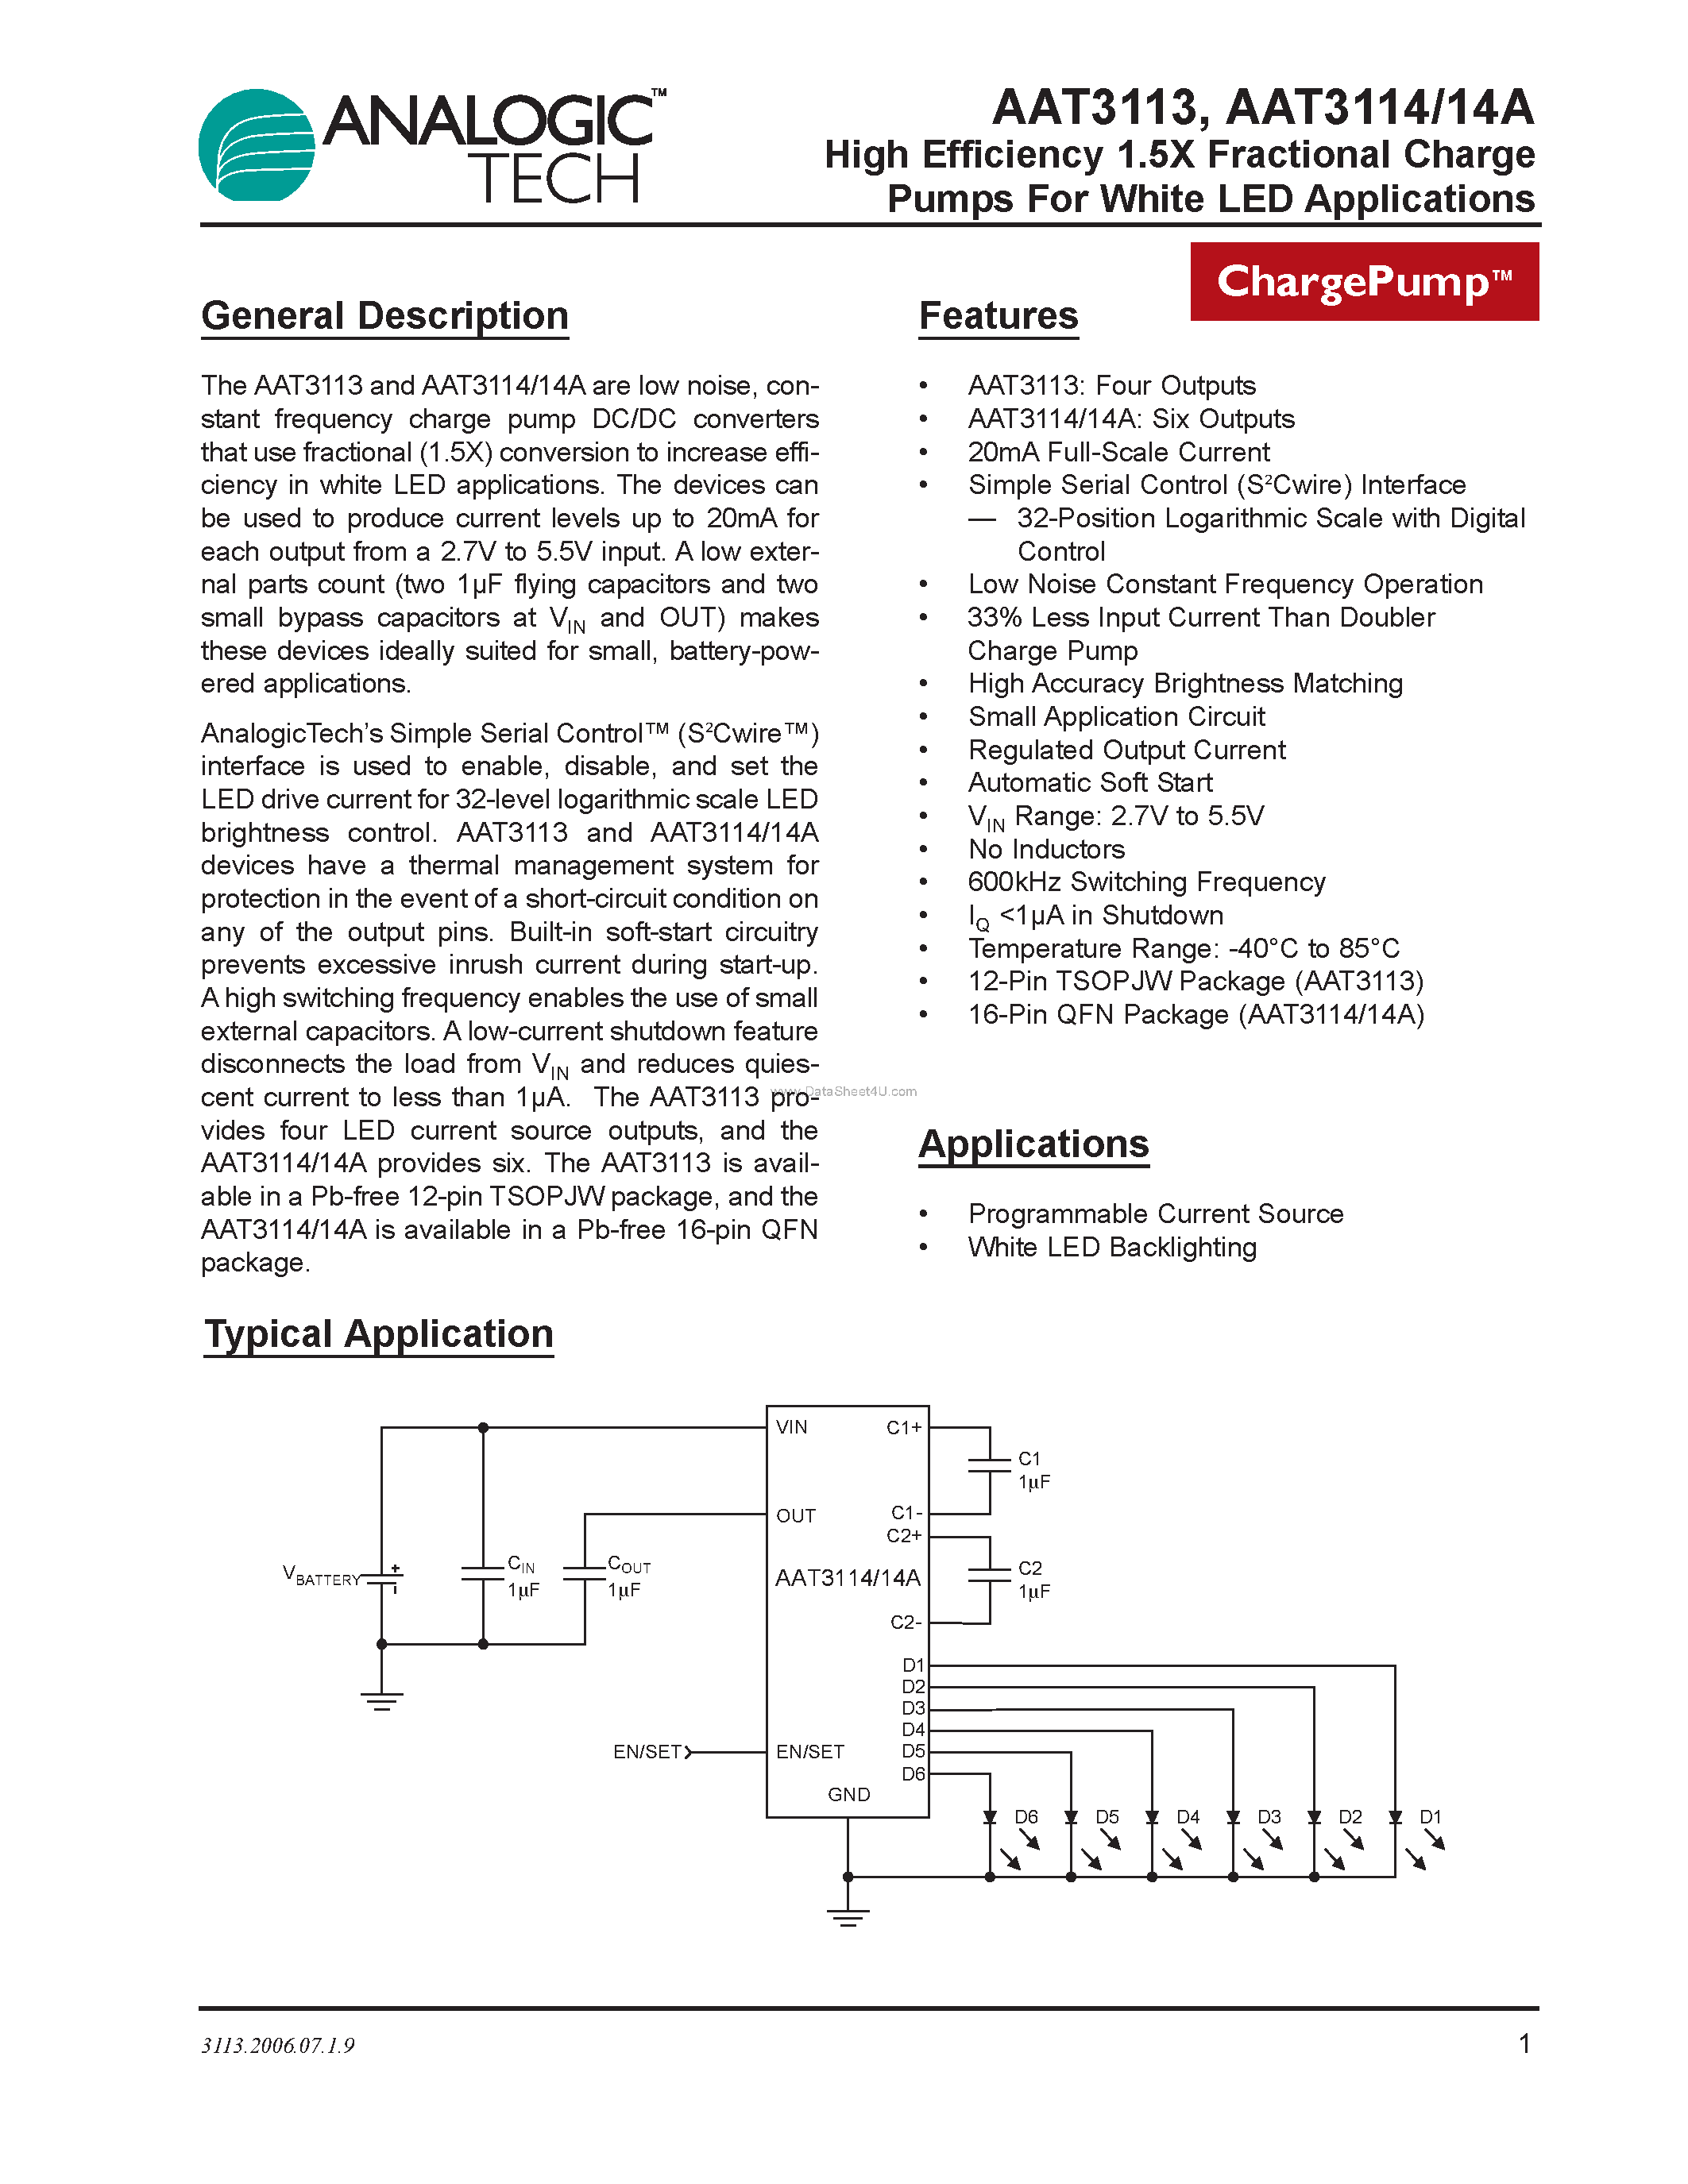 Datasheet AAT3113 - High Efficiency 1.5X Fractional Charge Pumps For White LED Applications page 1